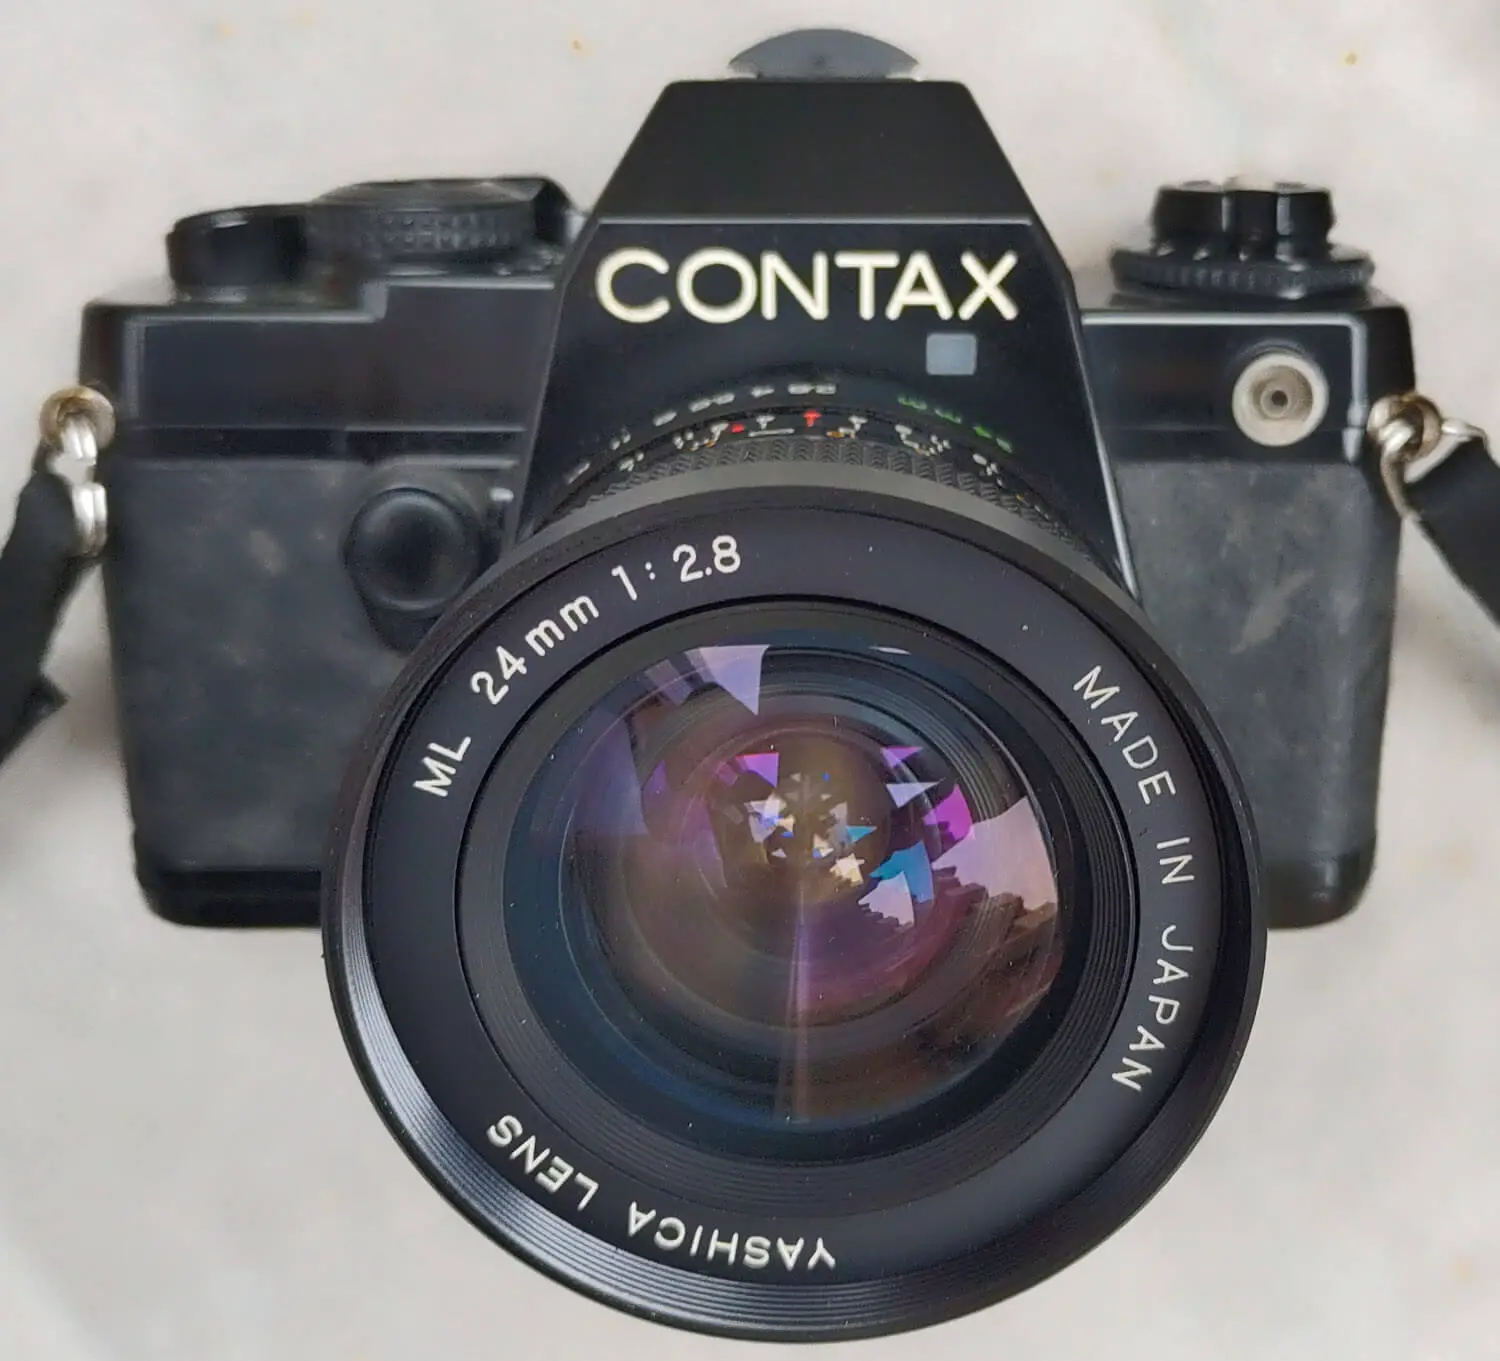 Mon objectif Contax 139 et Yashica 24mm f/2.8, Sergio Palazzi